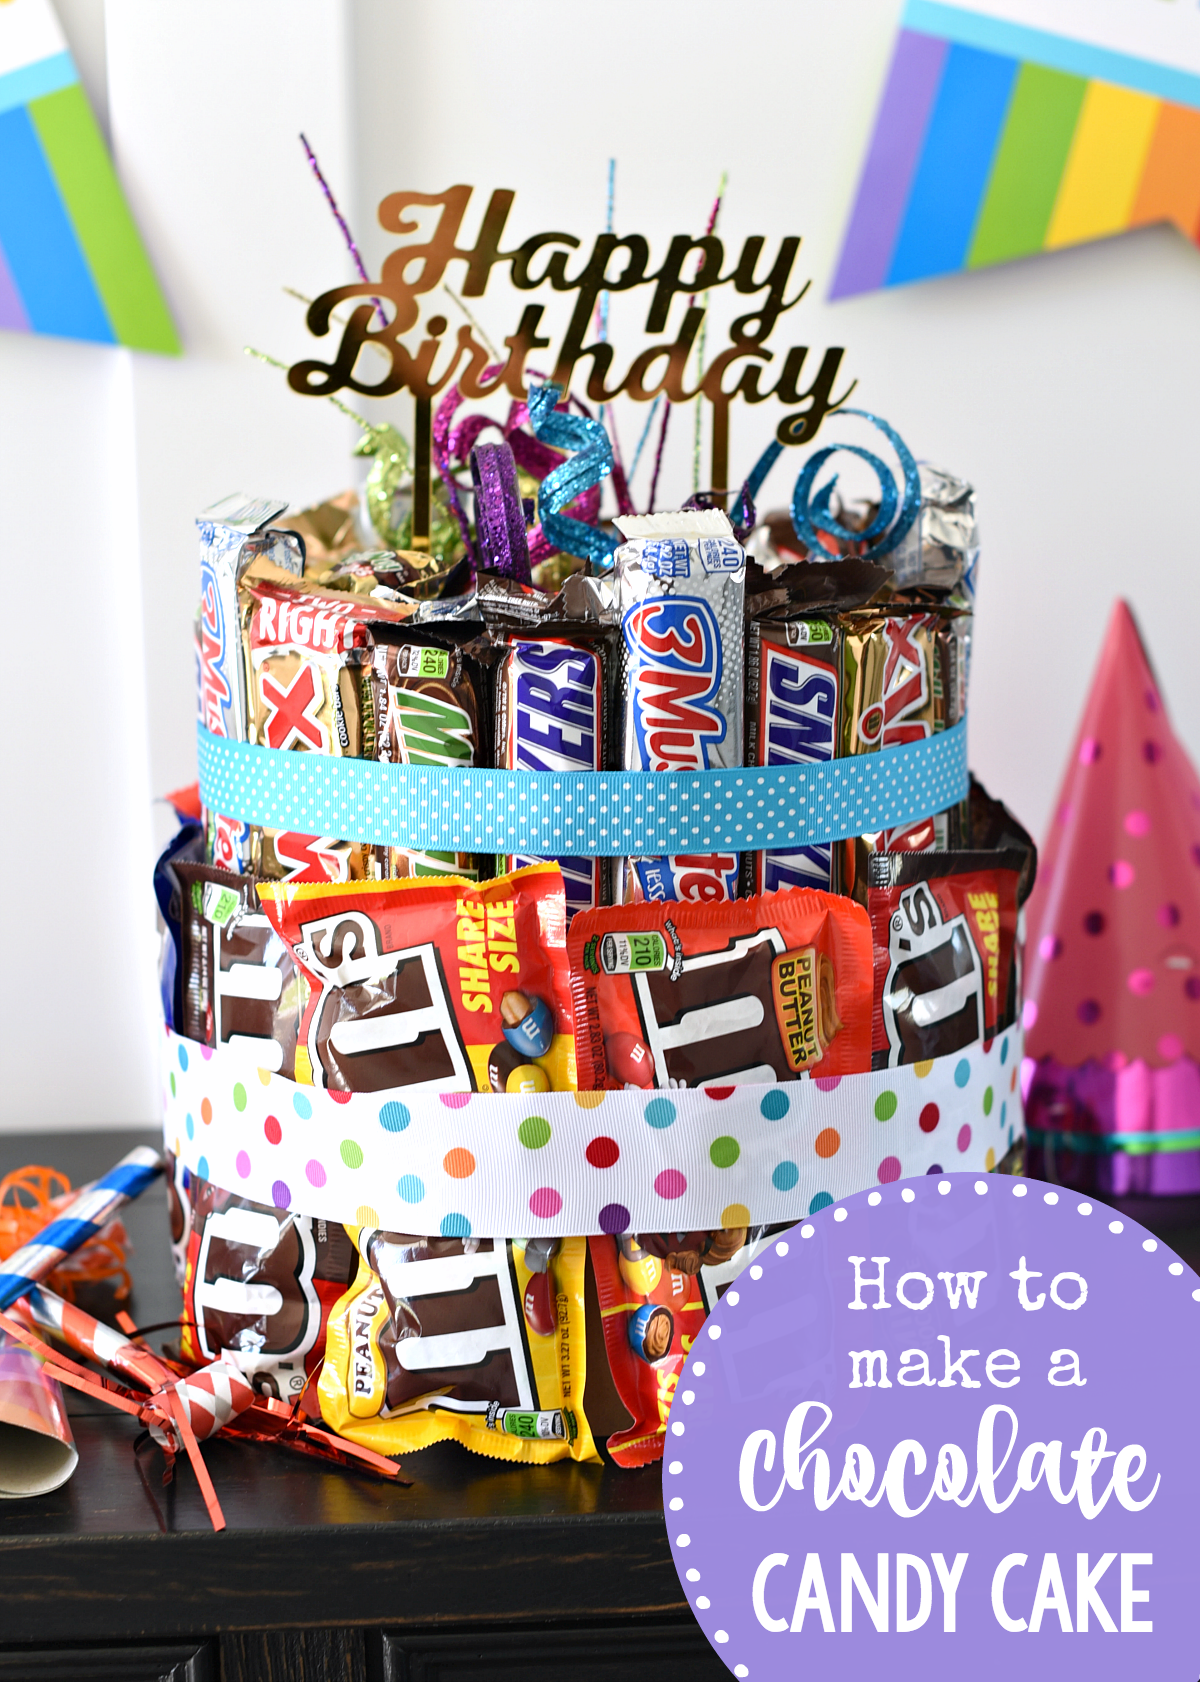 How to Make a Chocolate Candy Cake-This is the best birthday gift ever for someone who loves chocolate! #chocolate #birthday #gifts